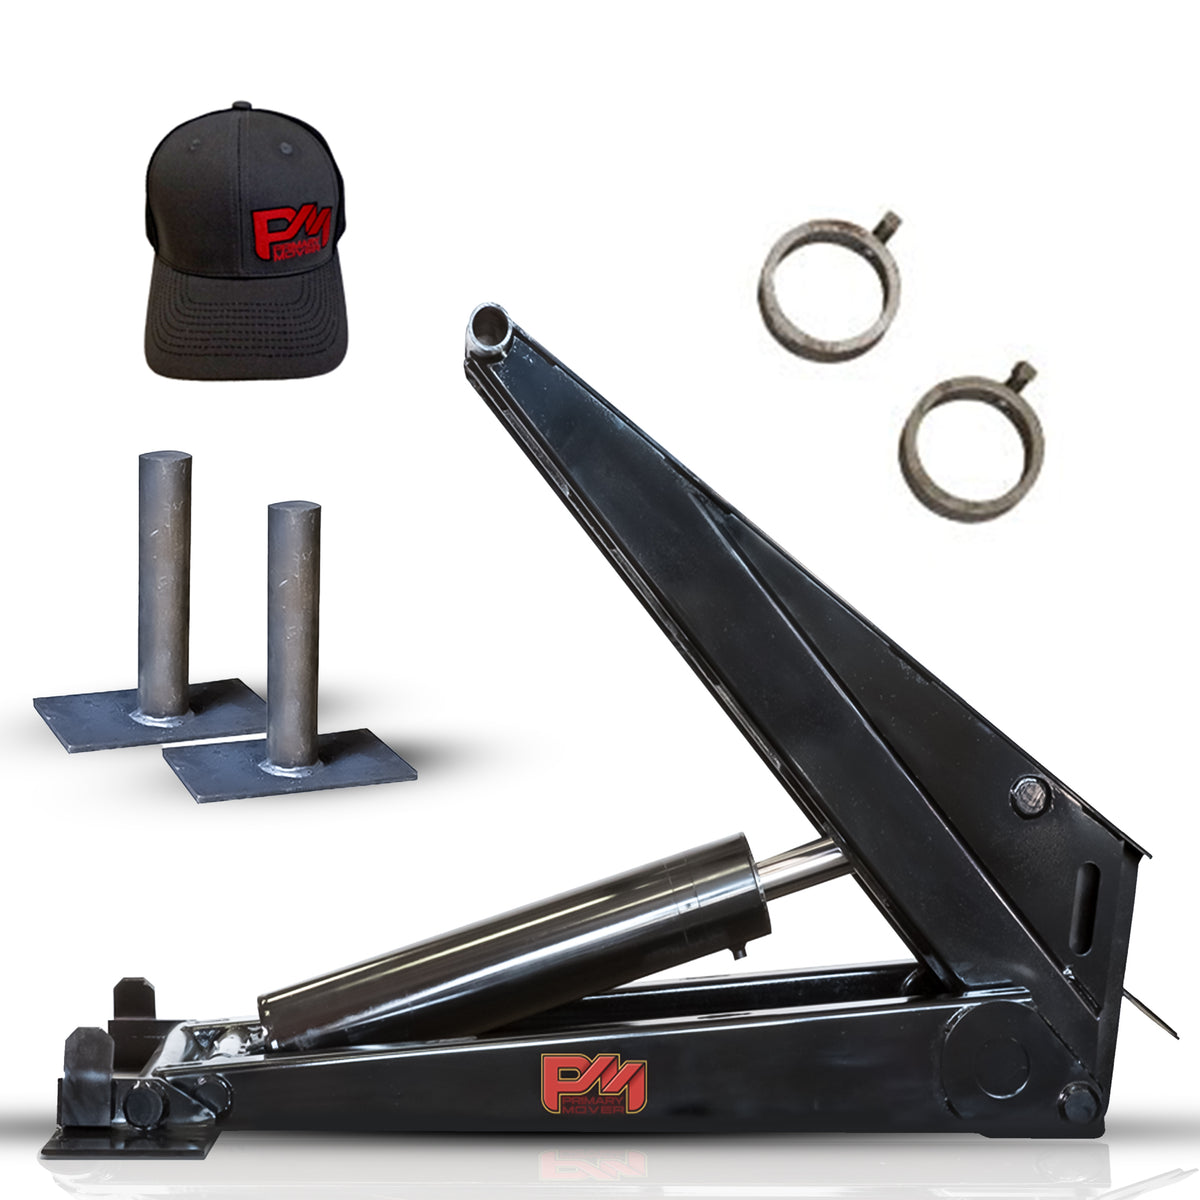 Hydraulic Scissor Hoist Kit - 12 Ton Capacity - Fits 16-20' Dump Body | PF-625: Black car jack with metal tubes, red and yellow logo, metal rings, and poles. Includes cylinder, mounting brackets, hydraulic pump, and more.